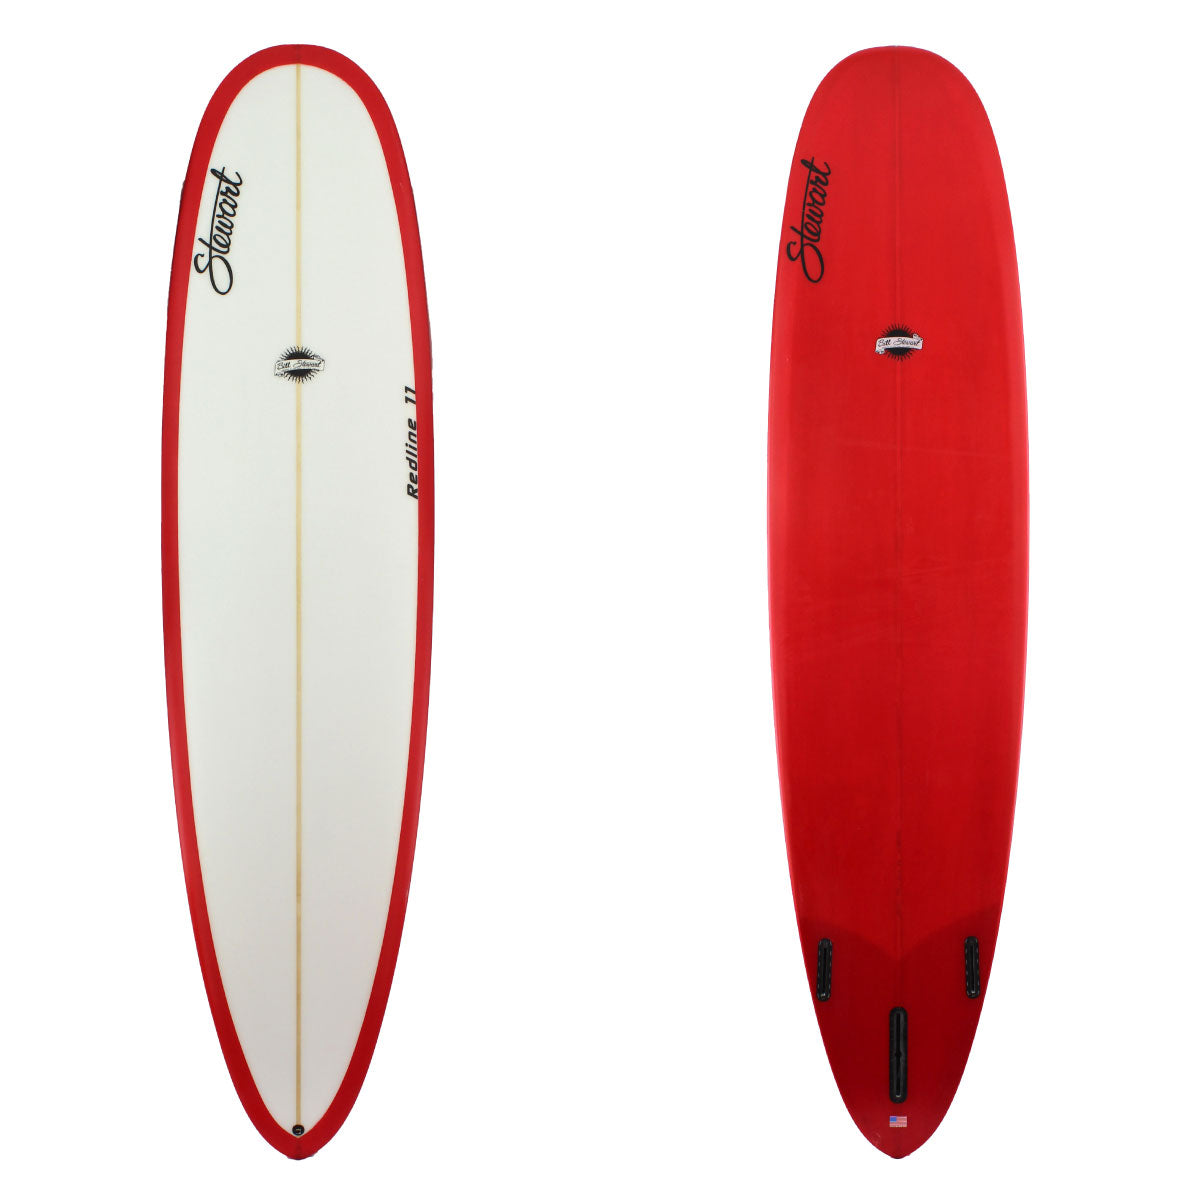 Stewart 9'0" Redline 11 Longboard with red bottom and red rails on deck (9'0", 24", 3 1/2") B#127571